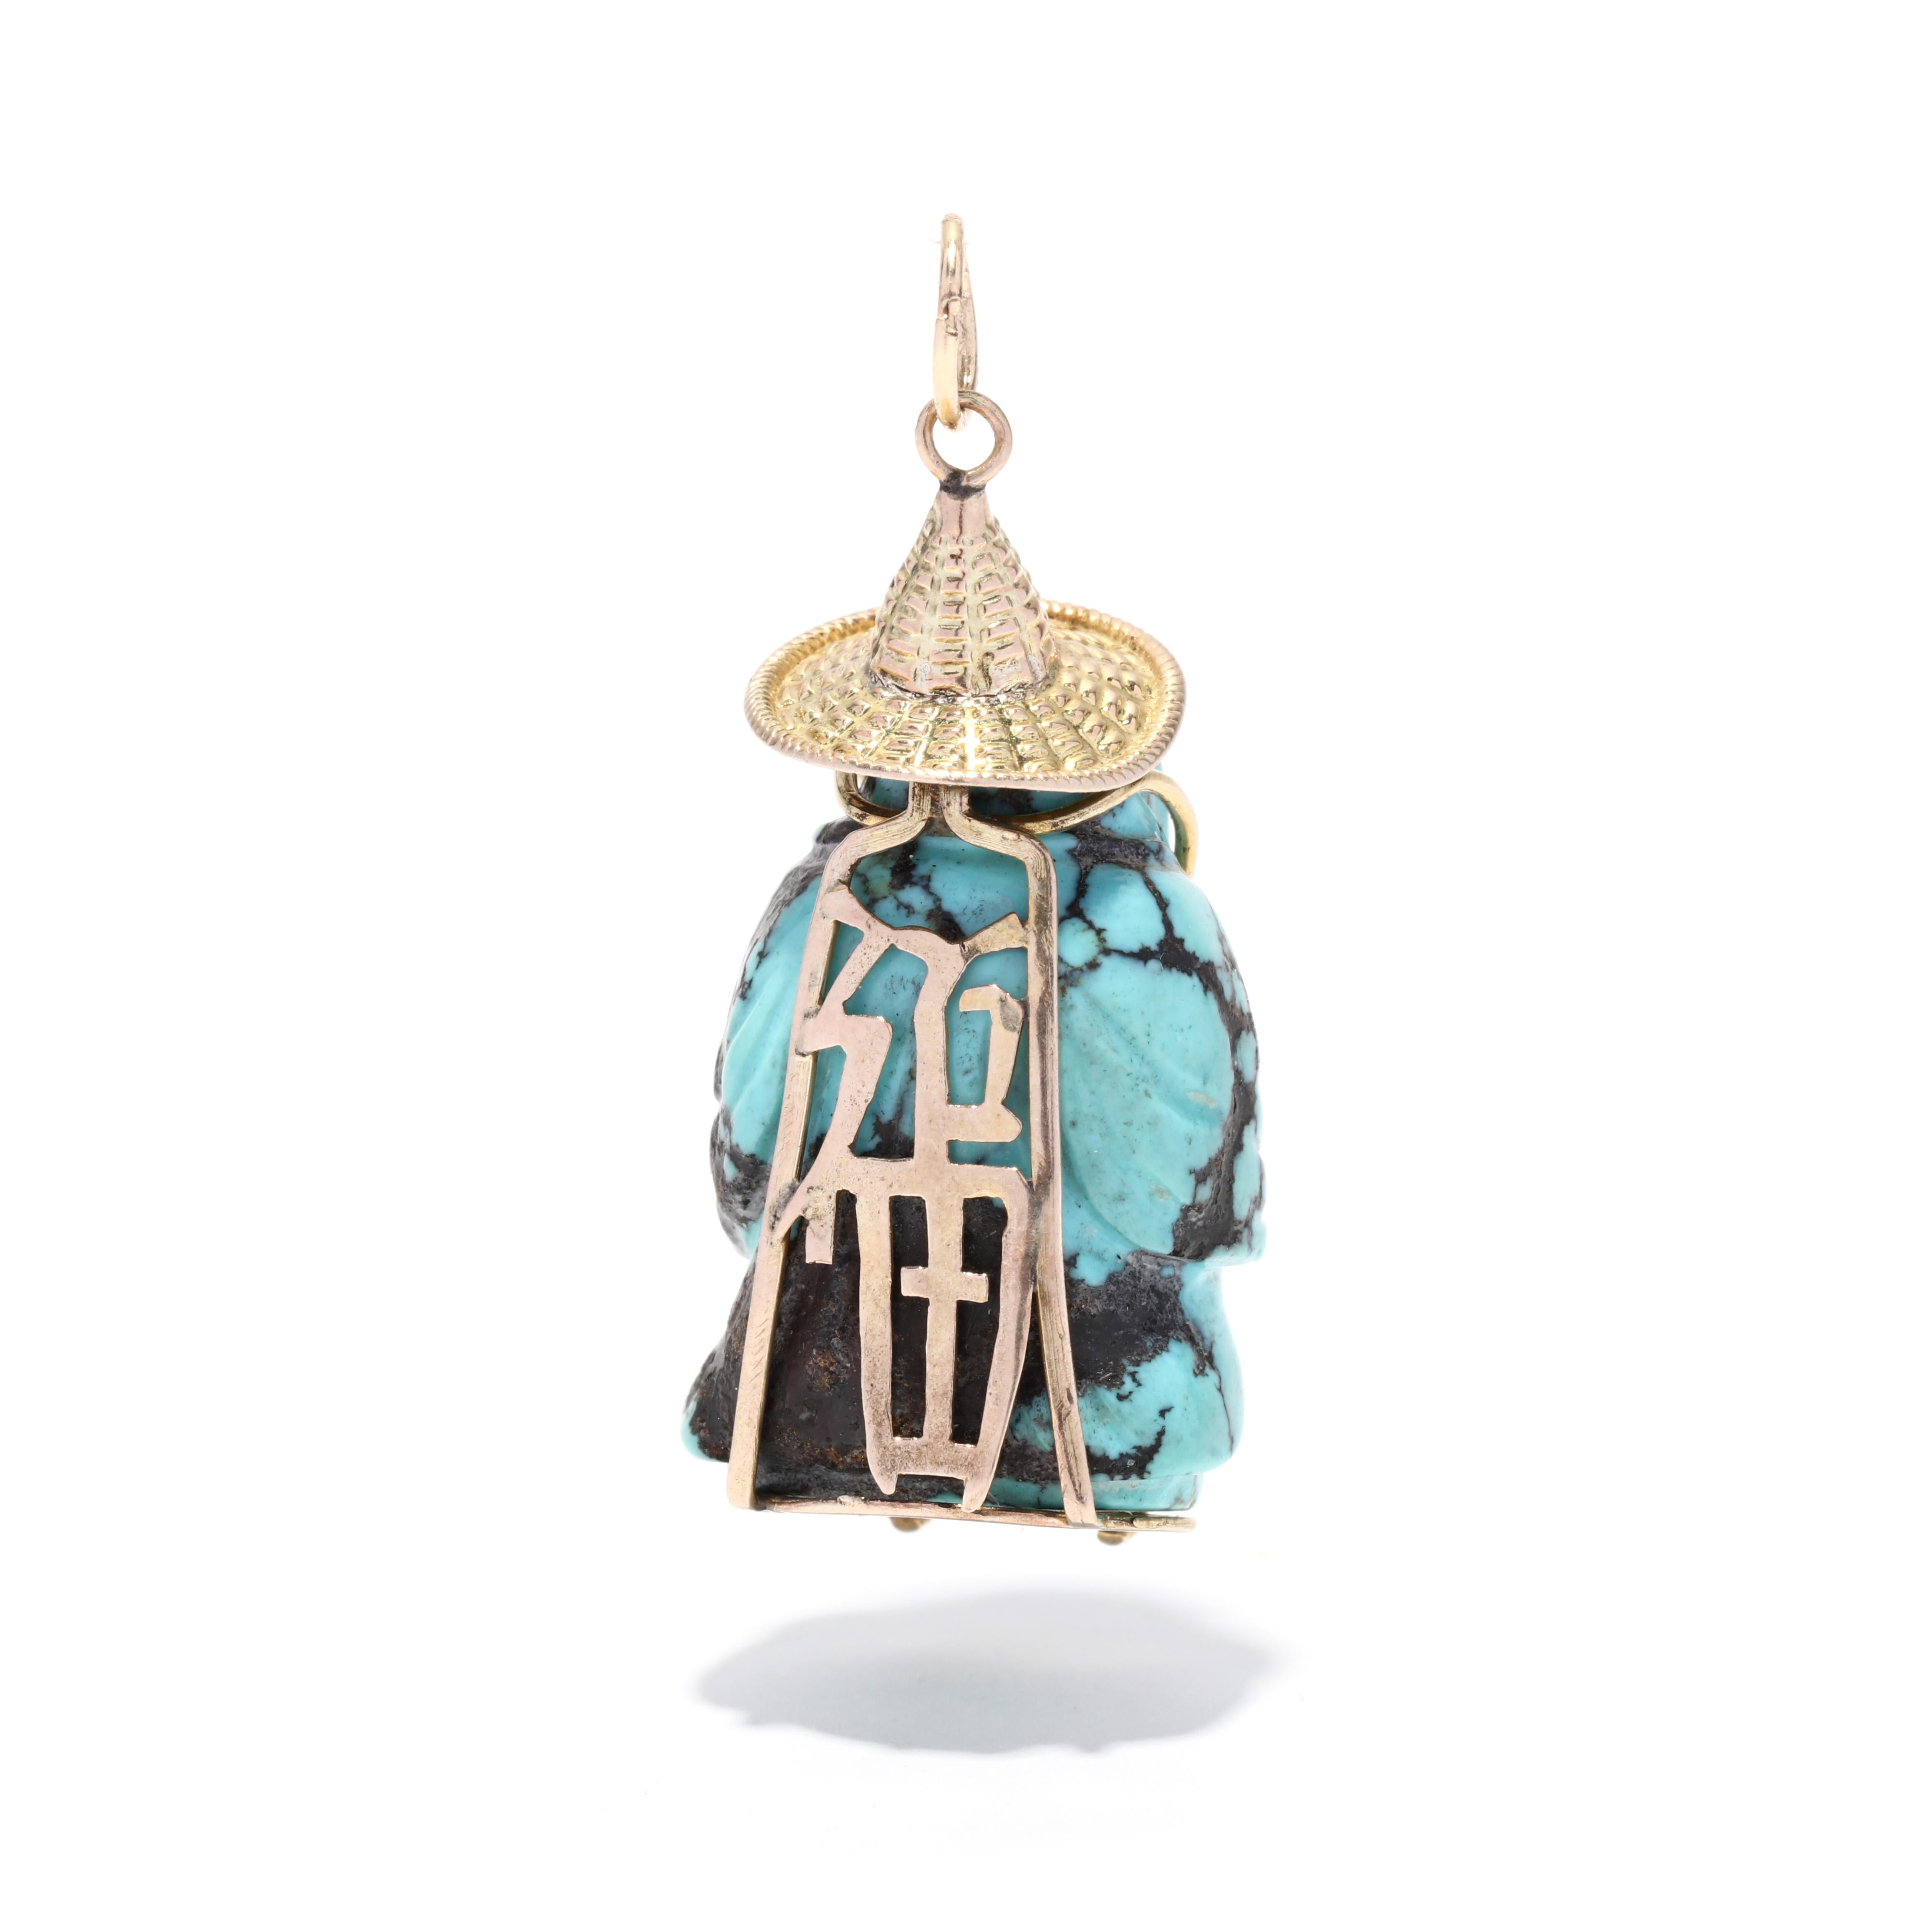 A vintage 14 karat yellow gold turquoise buddha charm, This large charm features a carved turquoise stone in Buddha motif with a gold hat and small pearl bead detail.

Length: 1.5 in.

Width: 5/8 in.

Weight: 6.4 dwts. / 9.95 grams

Stamped: